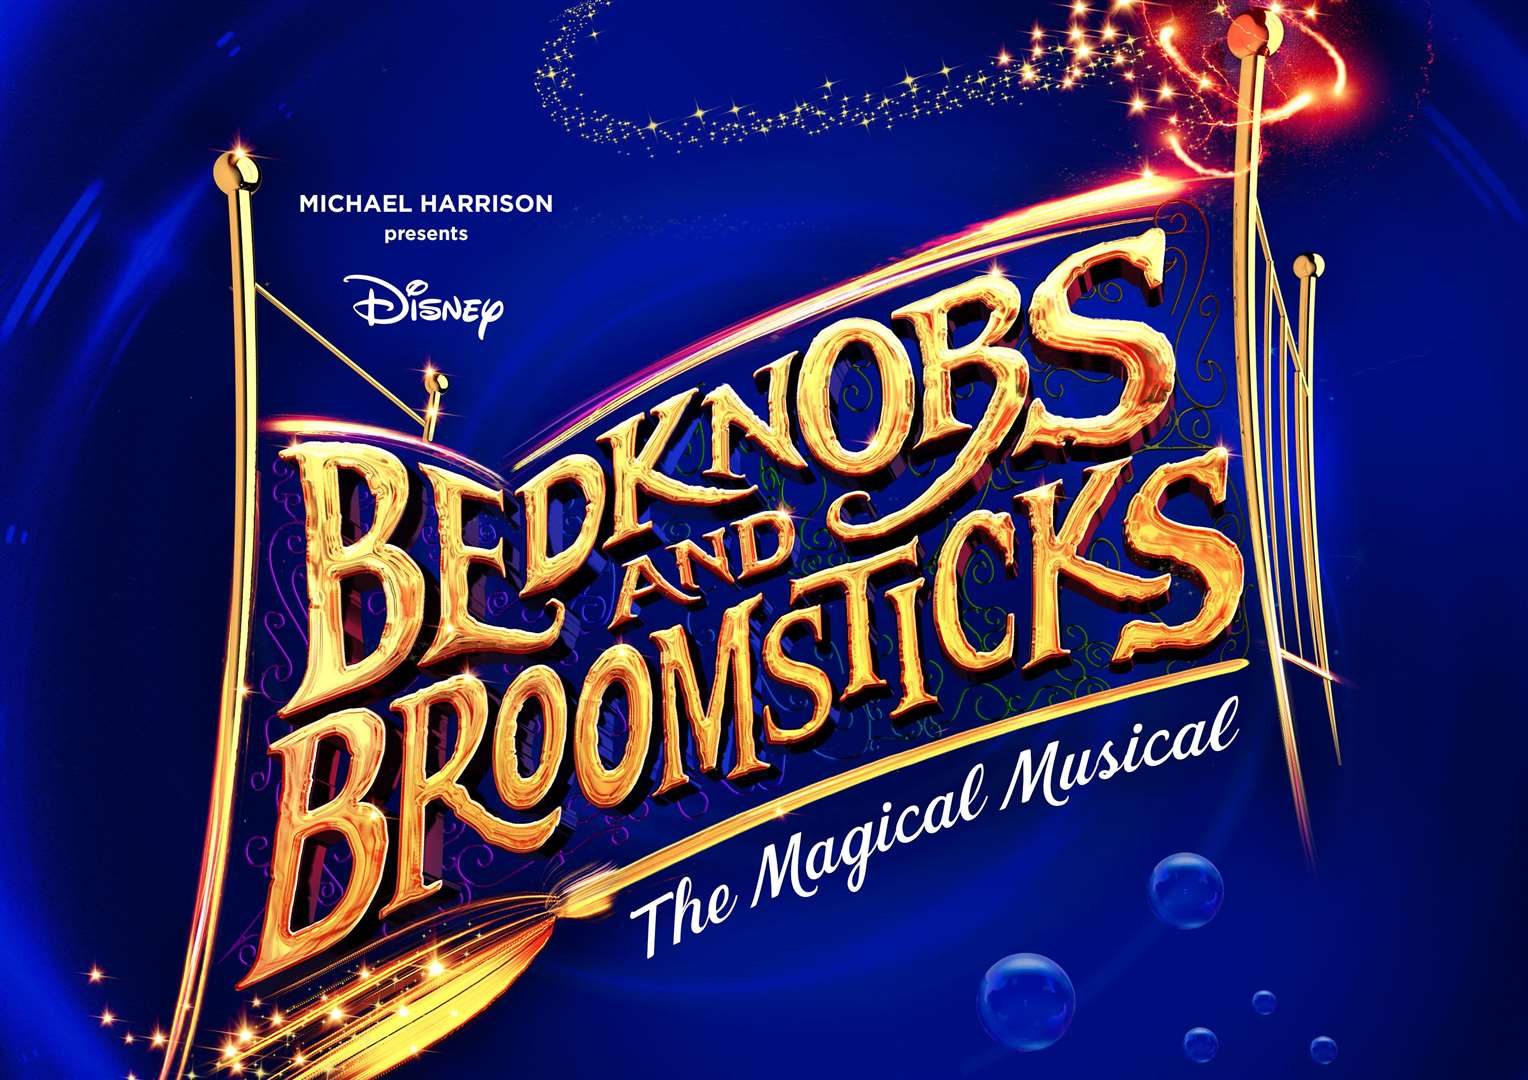 Bedknobs and Broomsticks is being turned into a new musical